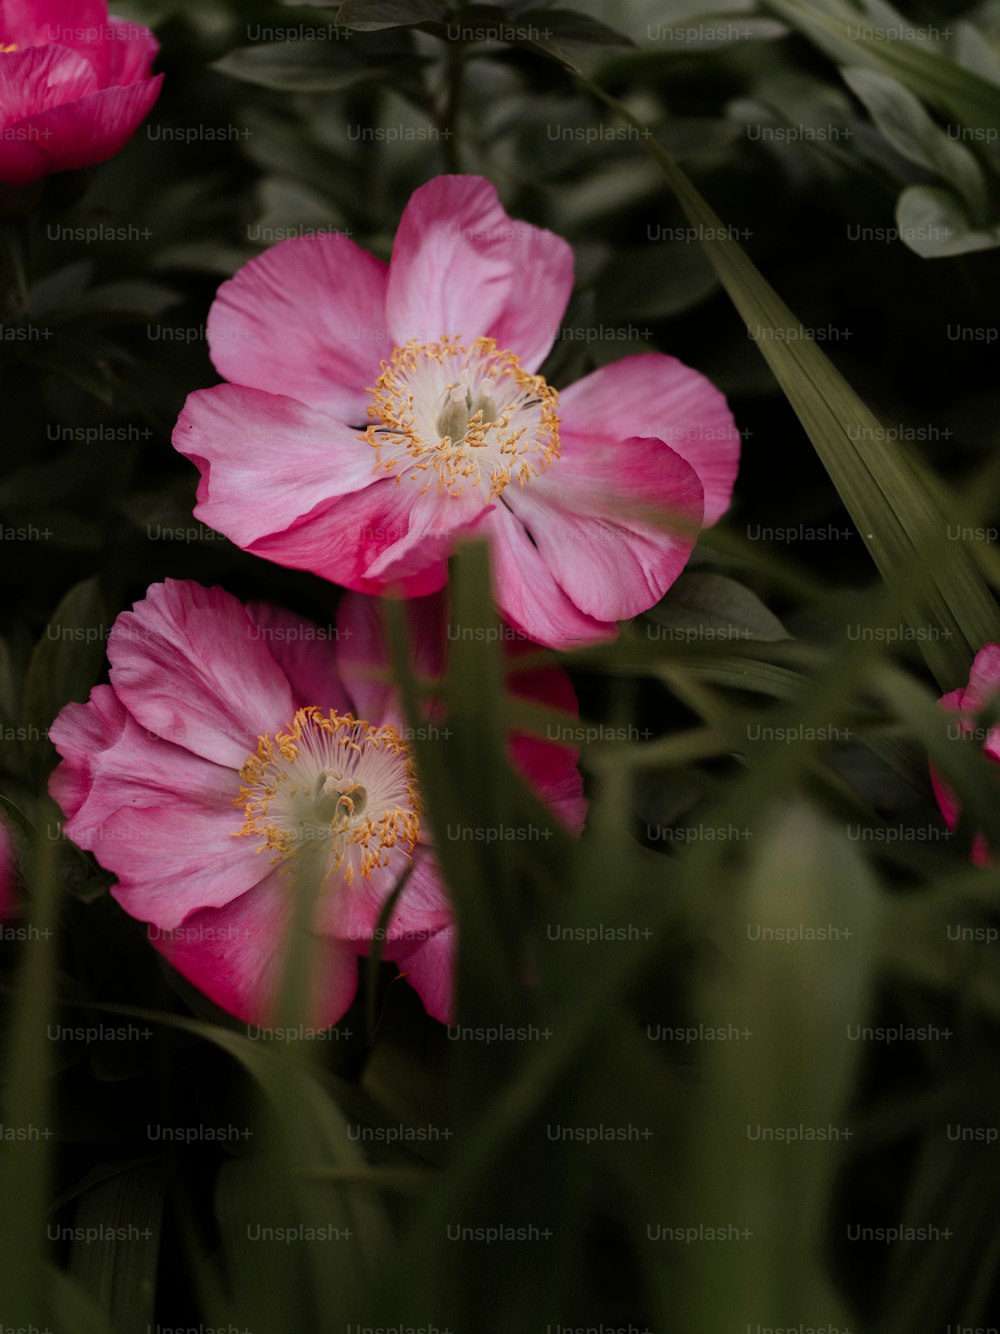 a group of pink flowers with green leaves